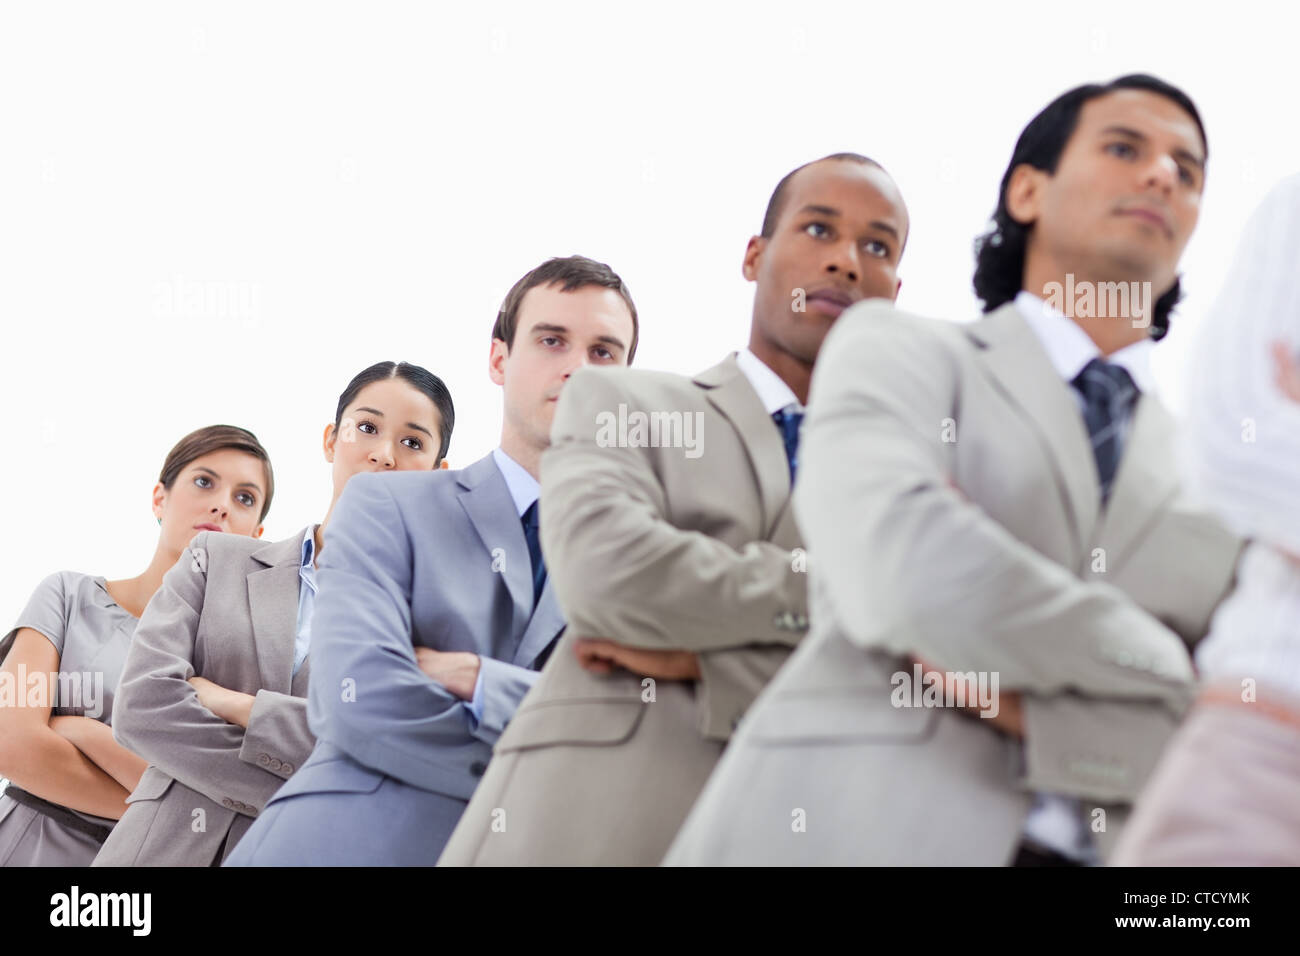 Low-angle shot of people dressed in suits crossing their arms in a single line Stock Photo